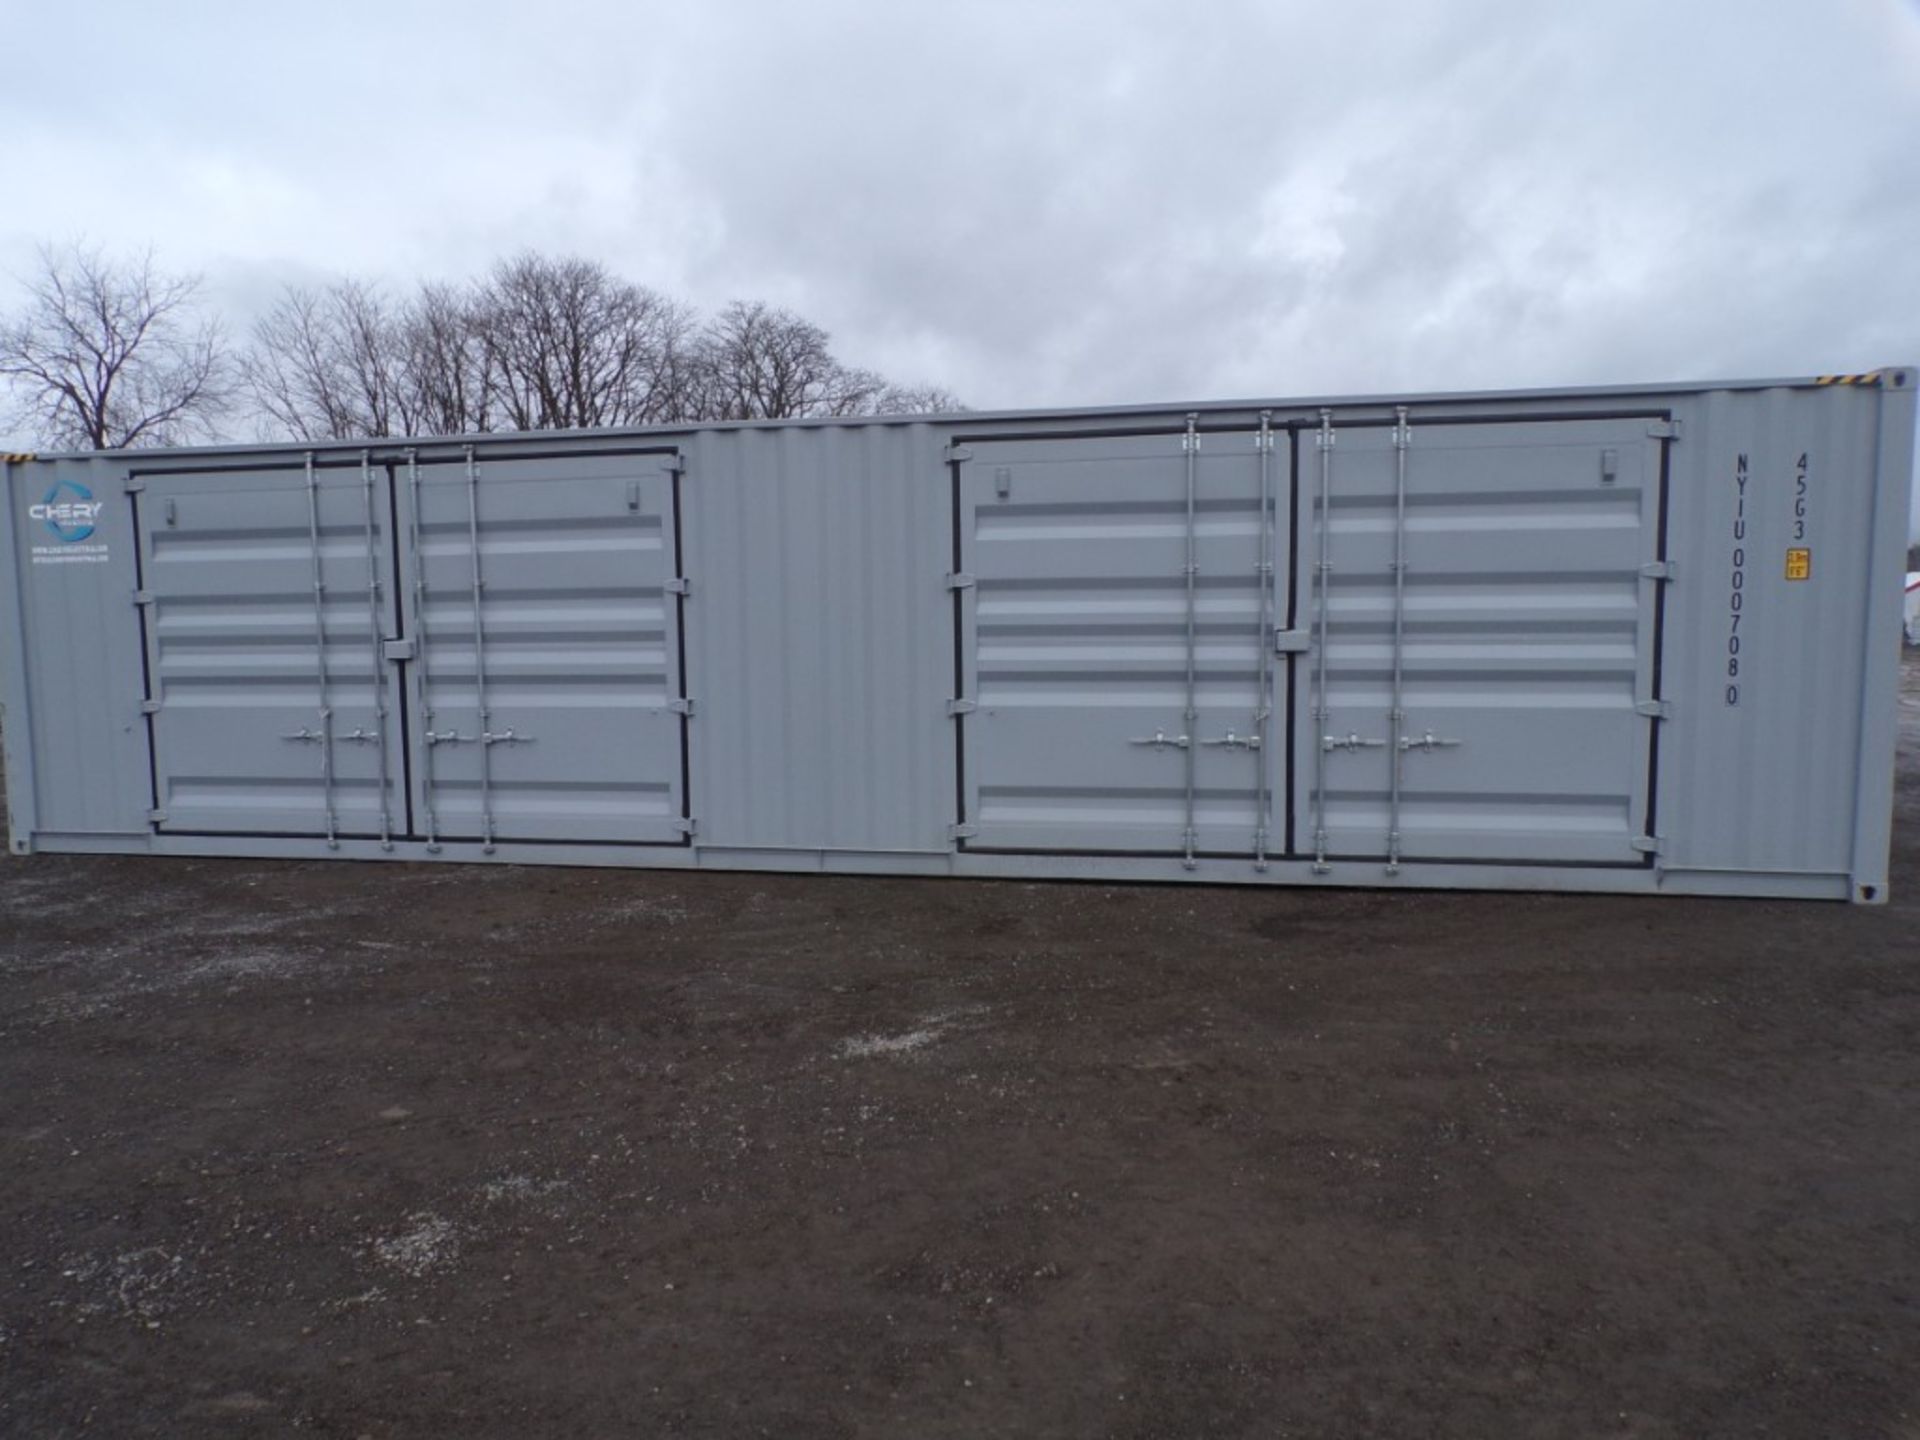 New Gray 40' Storage Container, (2) Large Side Access Doors, Barn Doors in 1 End, Cont # NY0007080